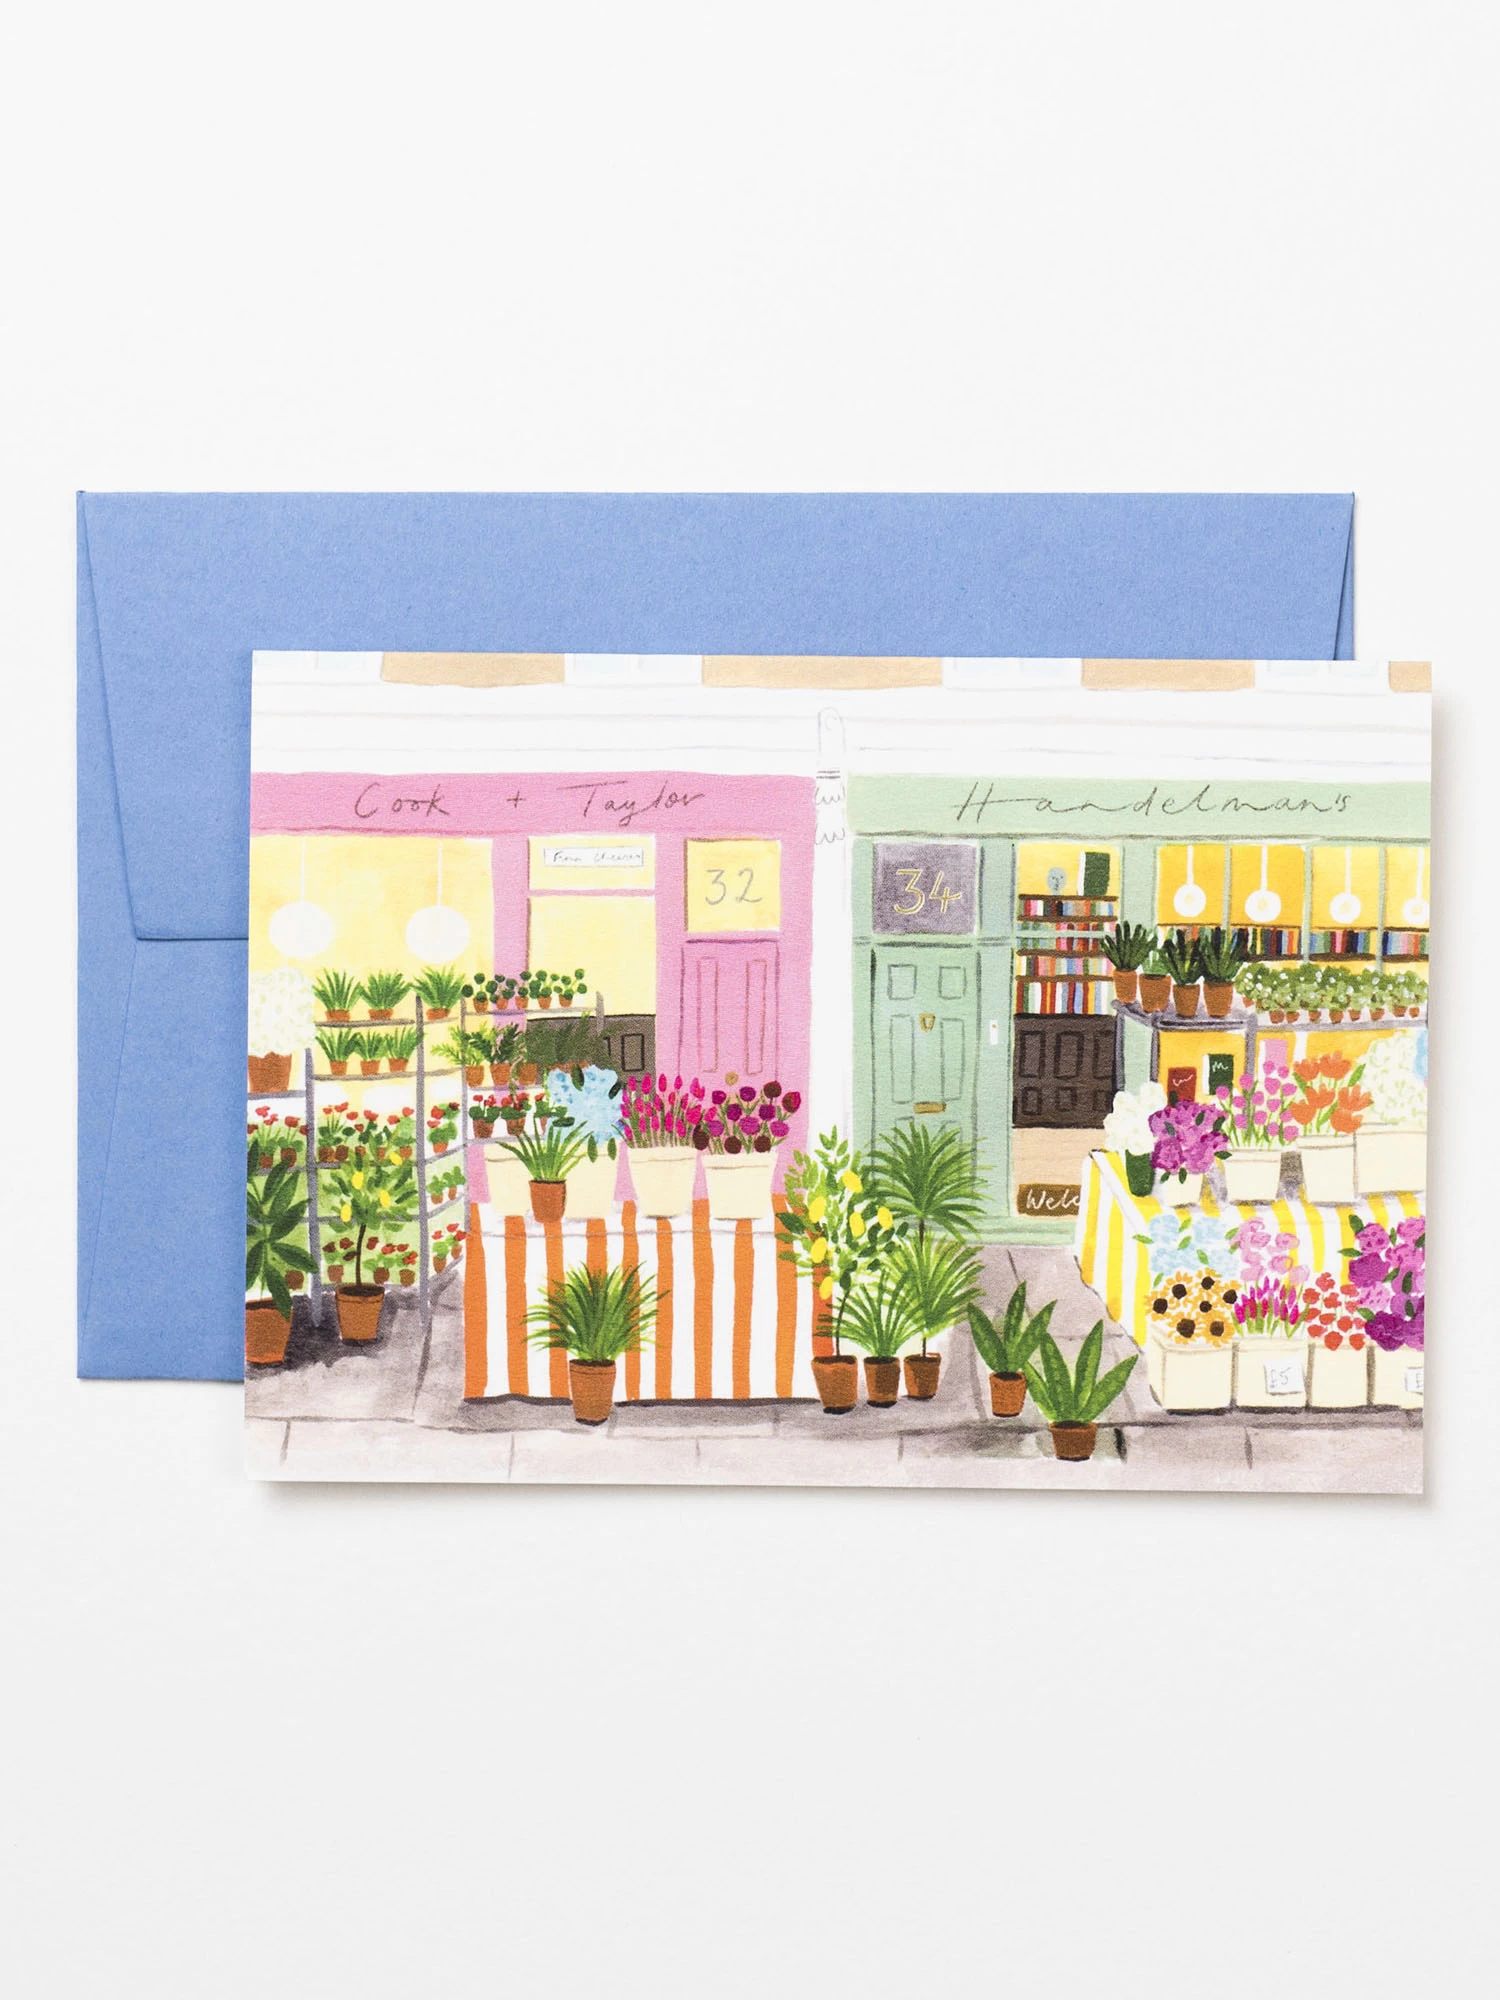 An illustrated card. The card features a painting of a flower market on a street with brightly coloured shop fronts. The flowers are in buckets set on top of tables with bright orange striped tablecloths. The card is placed on top of a pale blue luxury envelope.